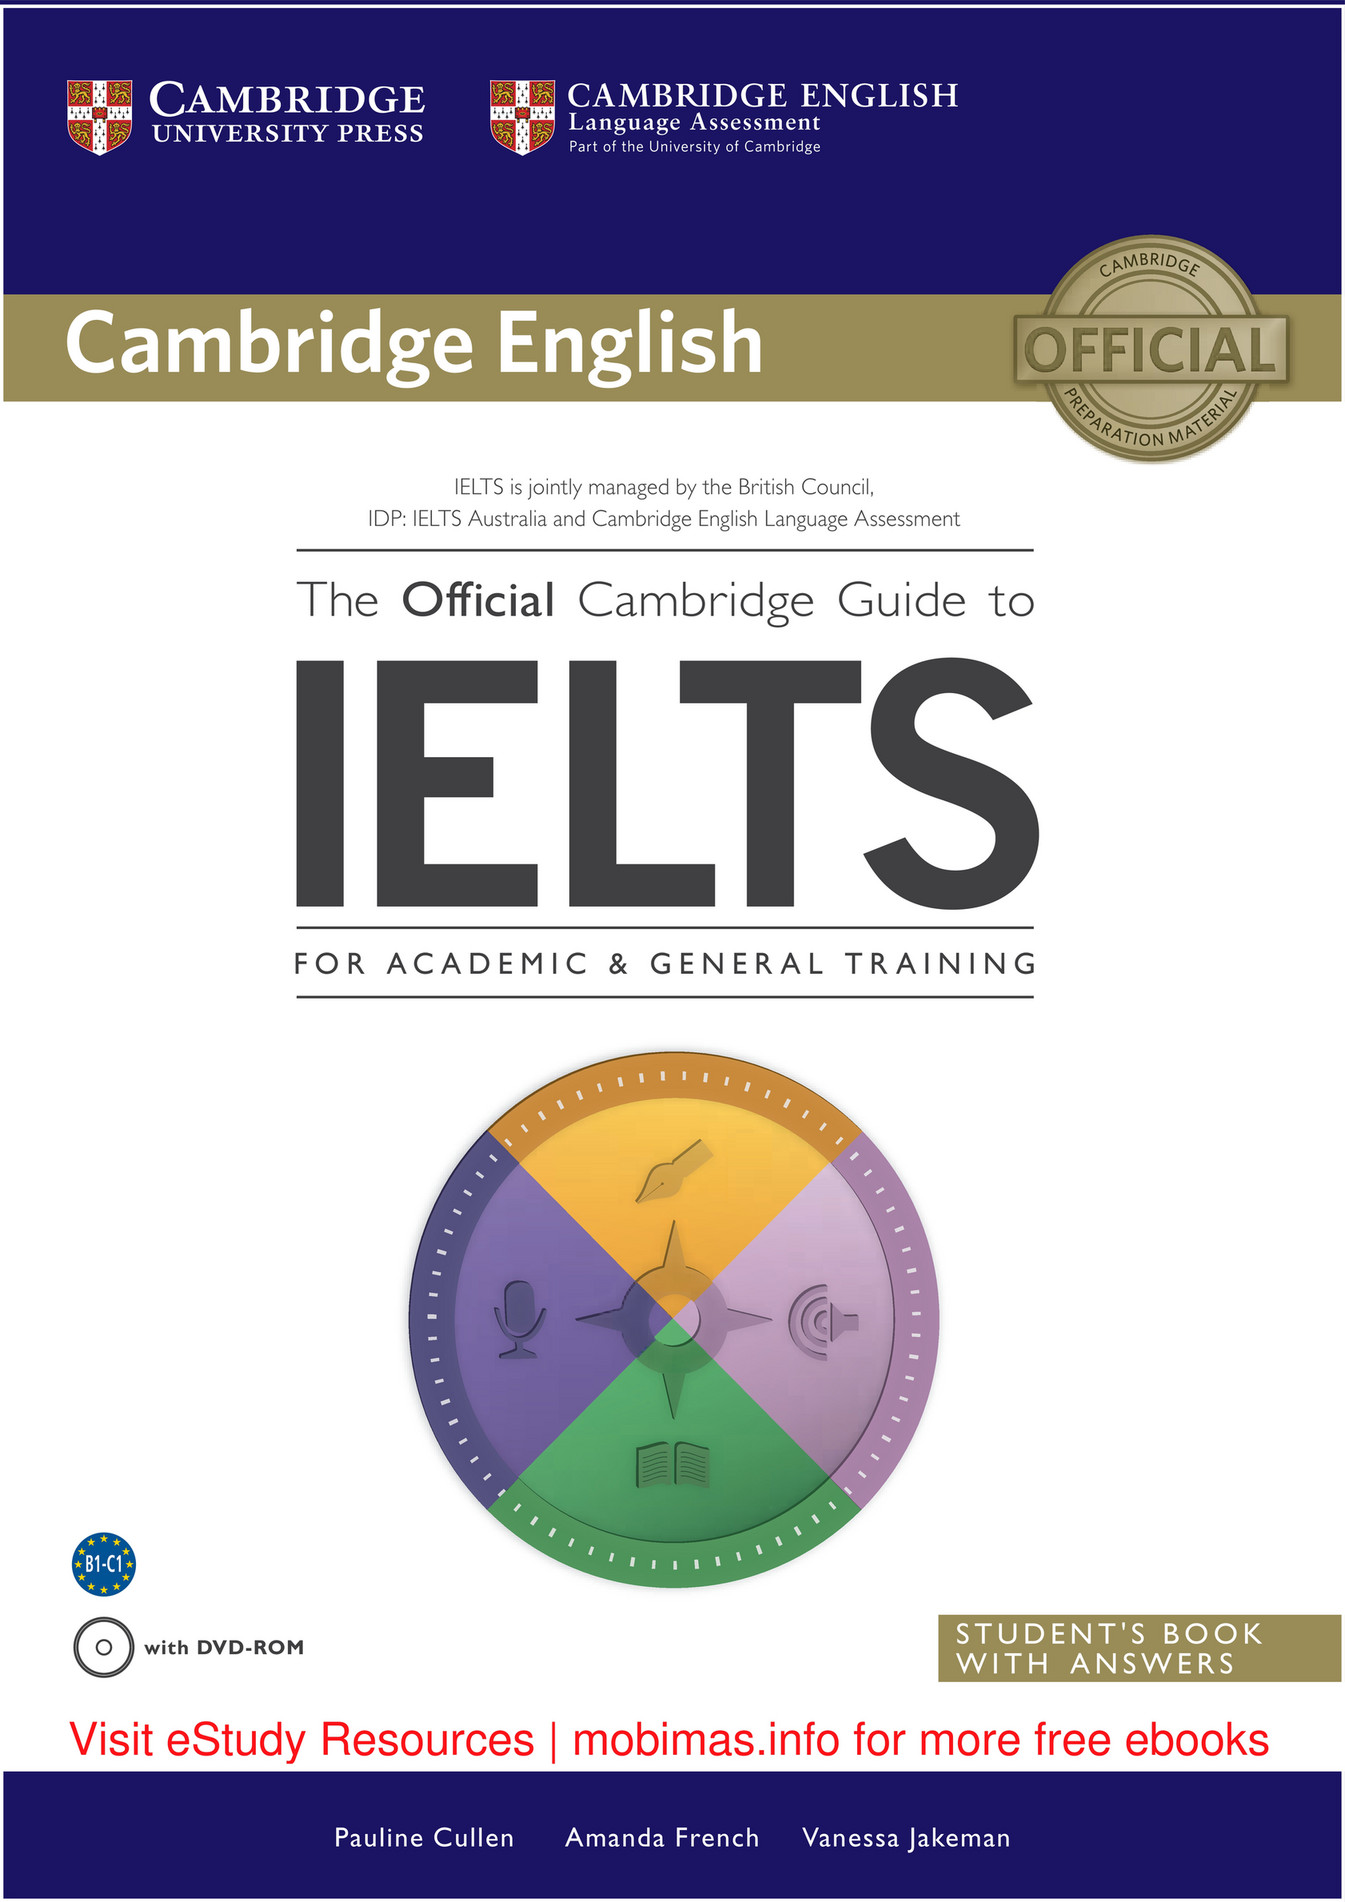 The Official Cambridge Guide to IELTS - Page 248-249 ...